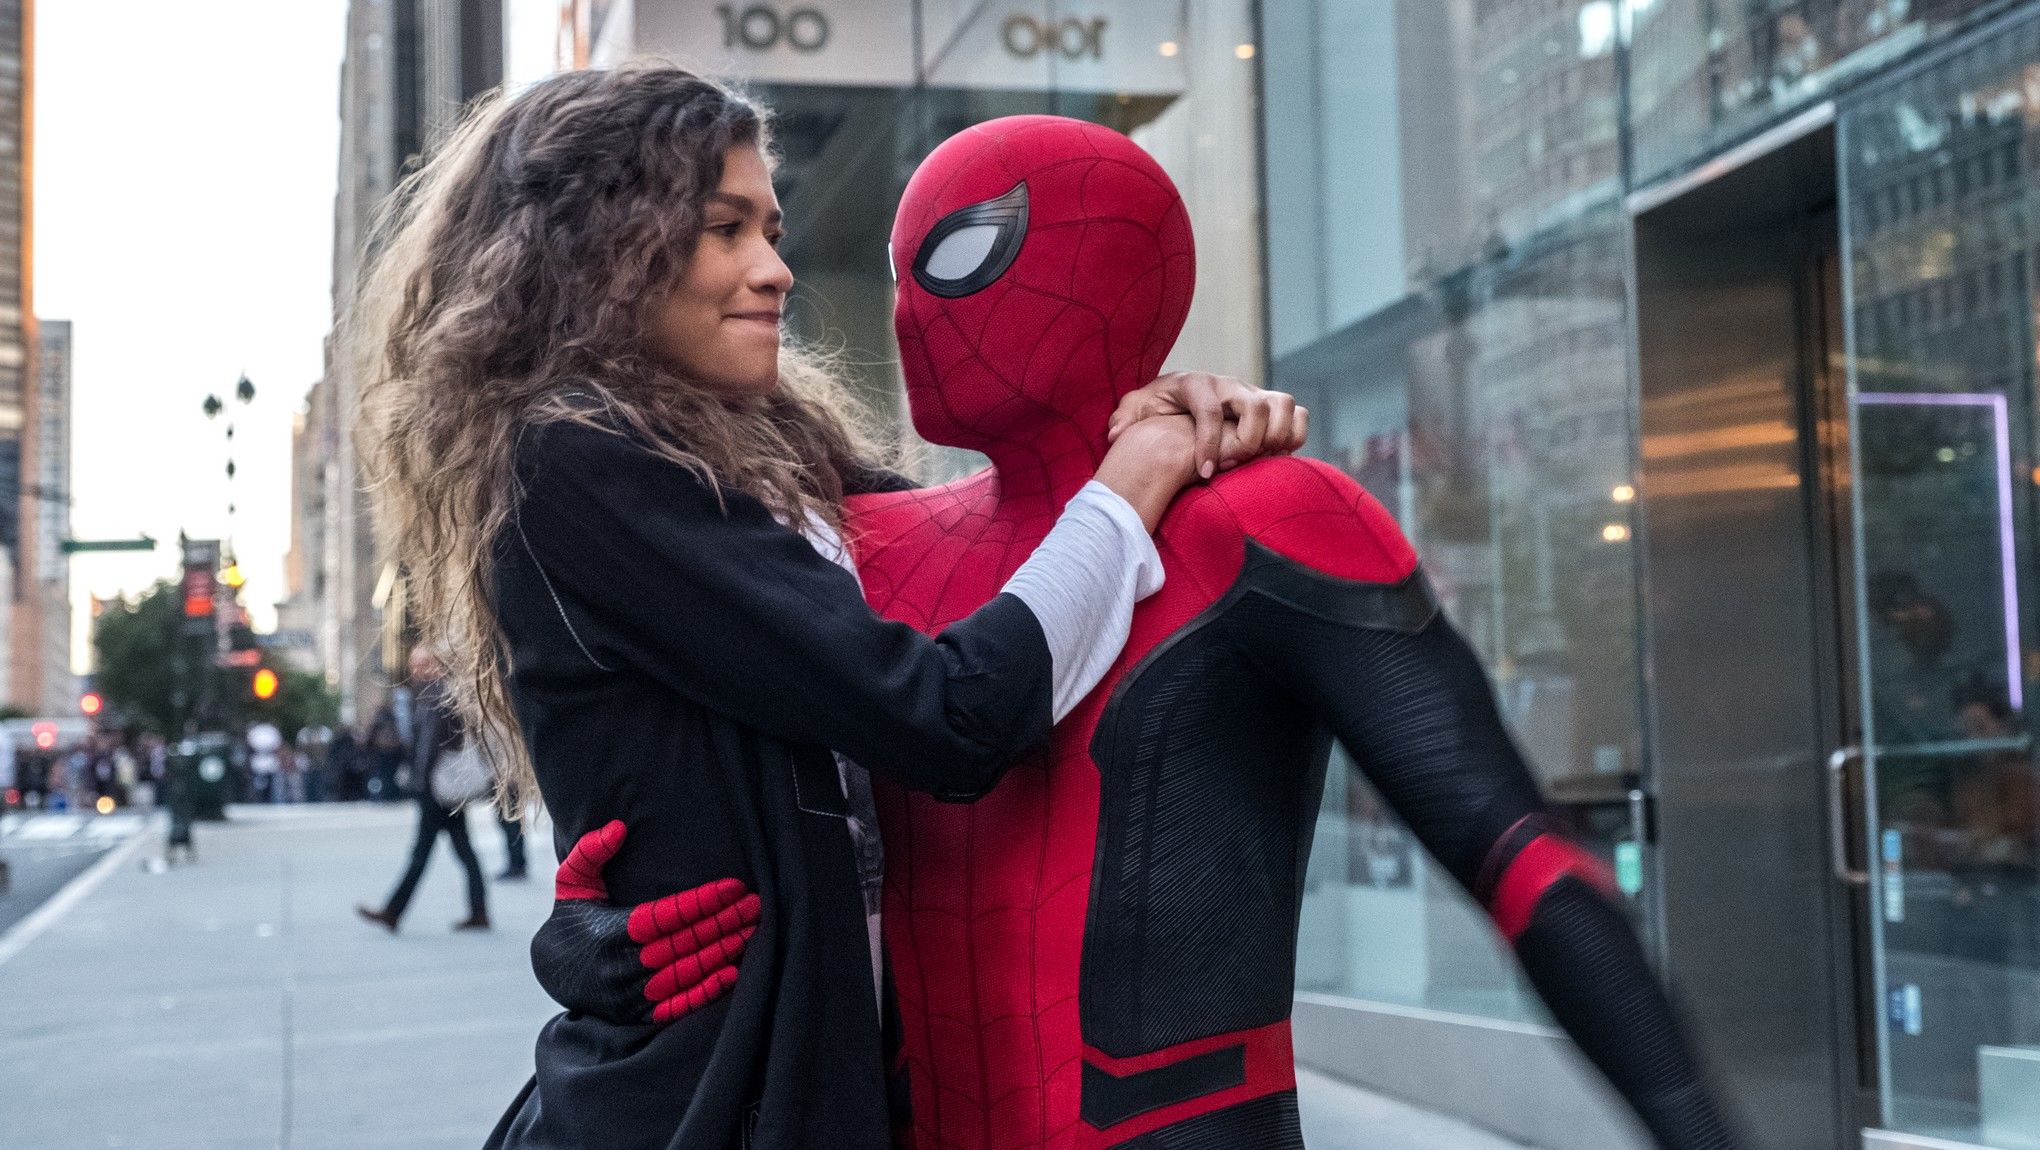 Zendaya and Tom Holland in Spider-Man Far From Home